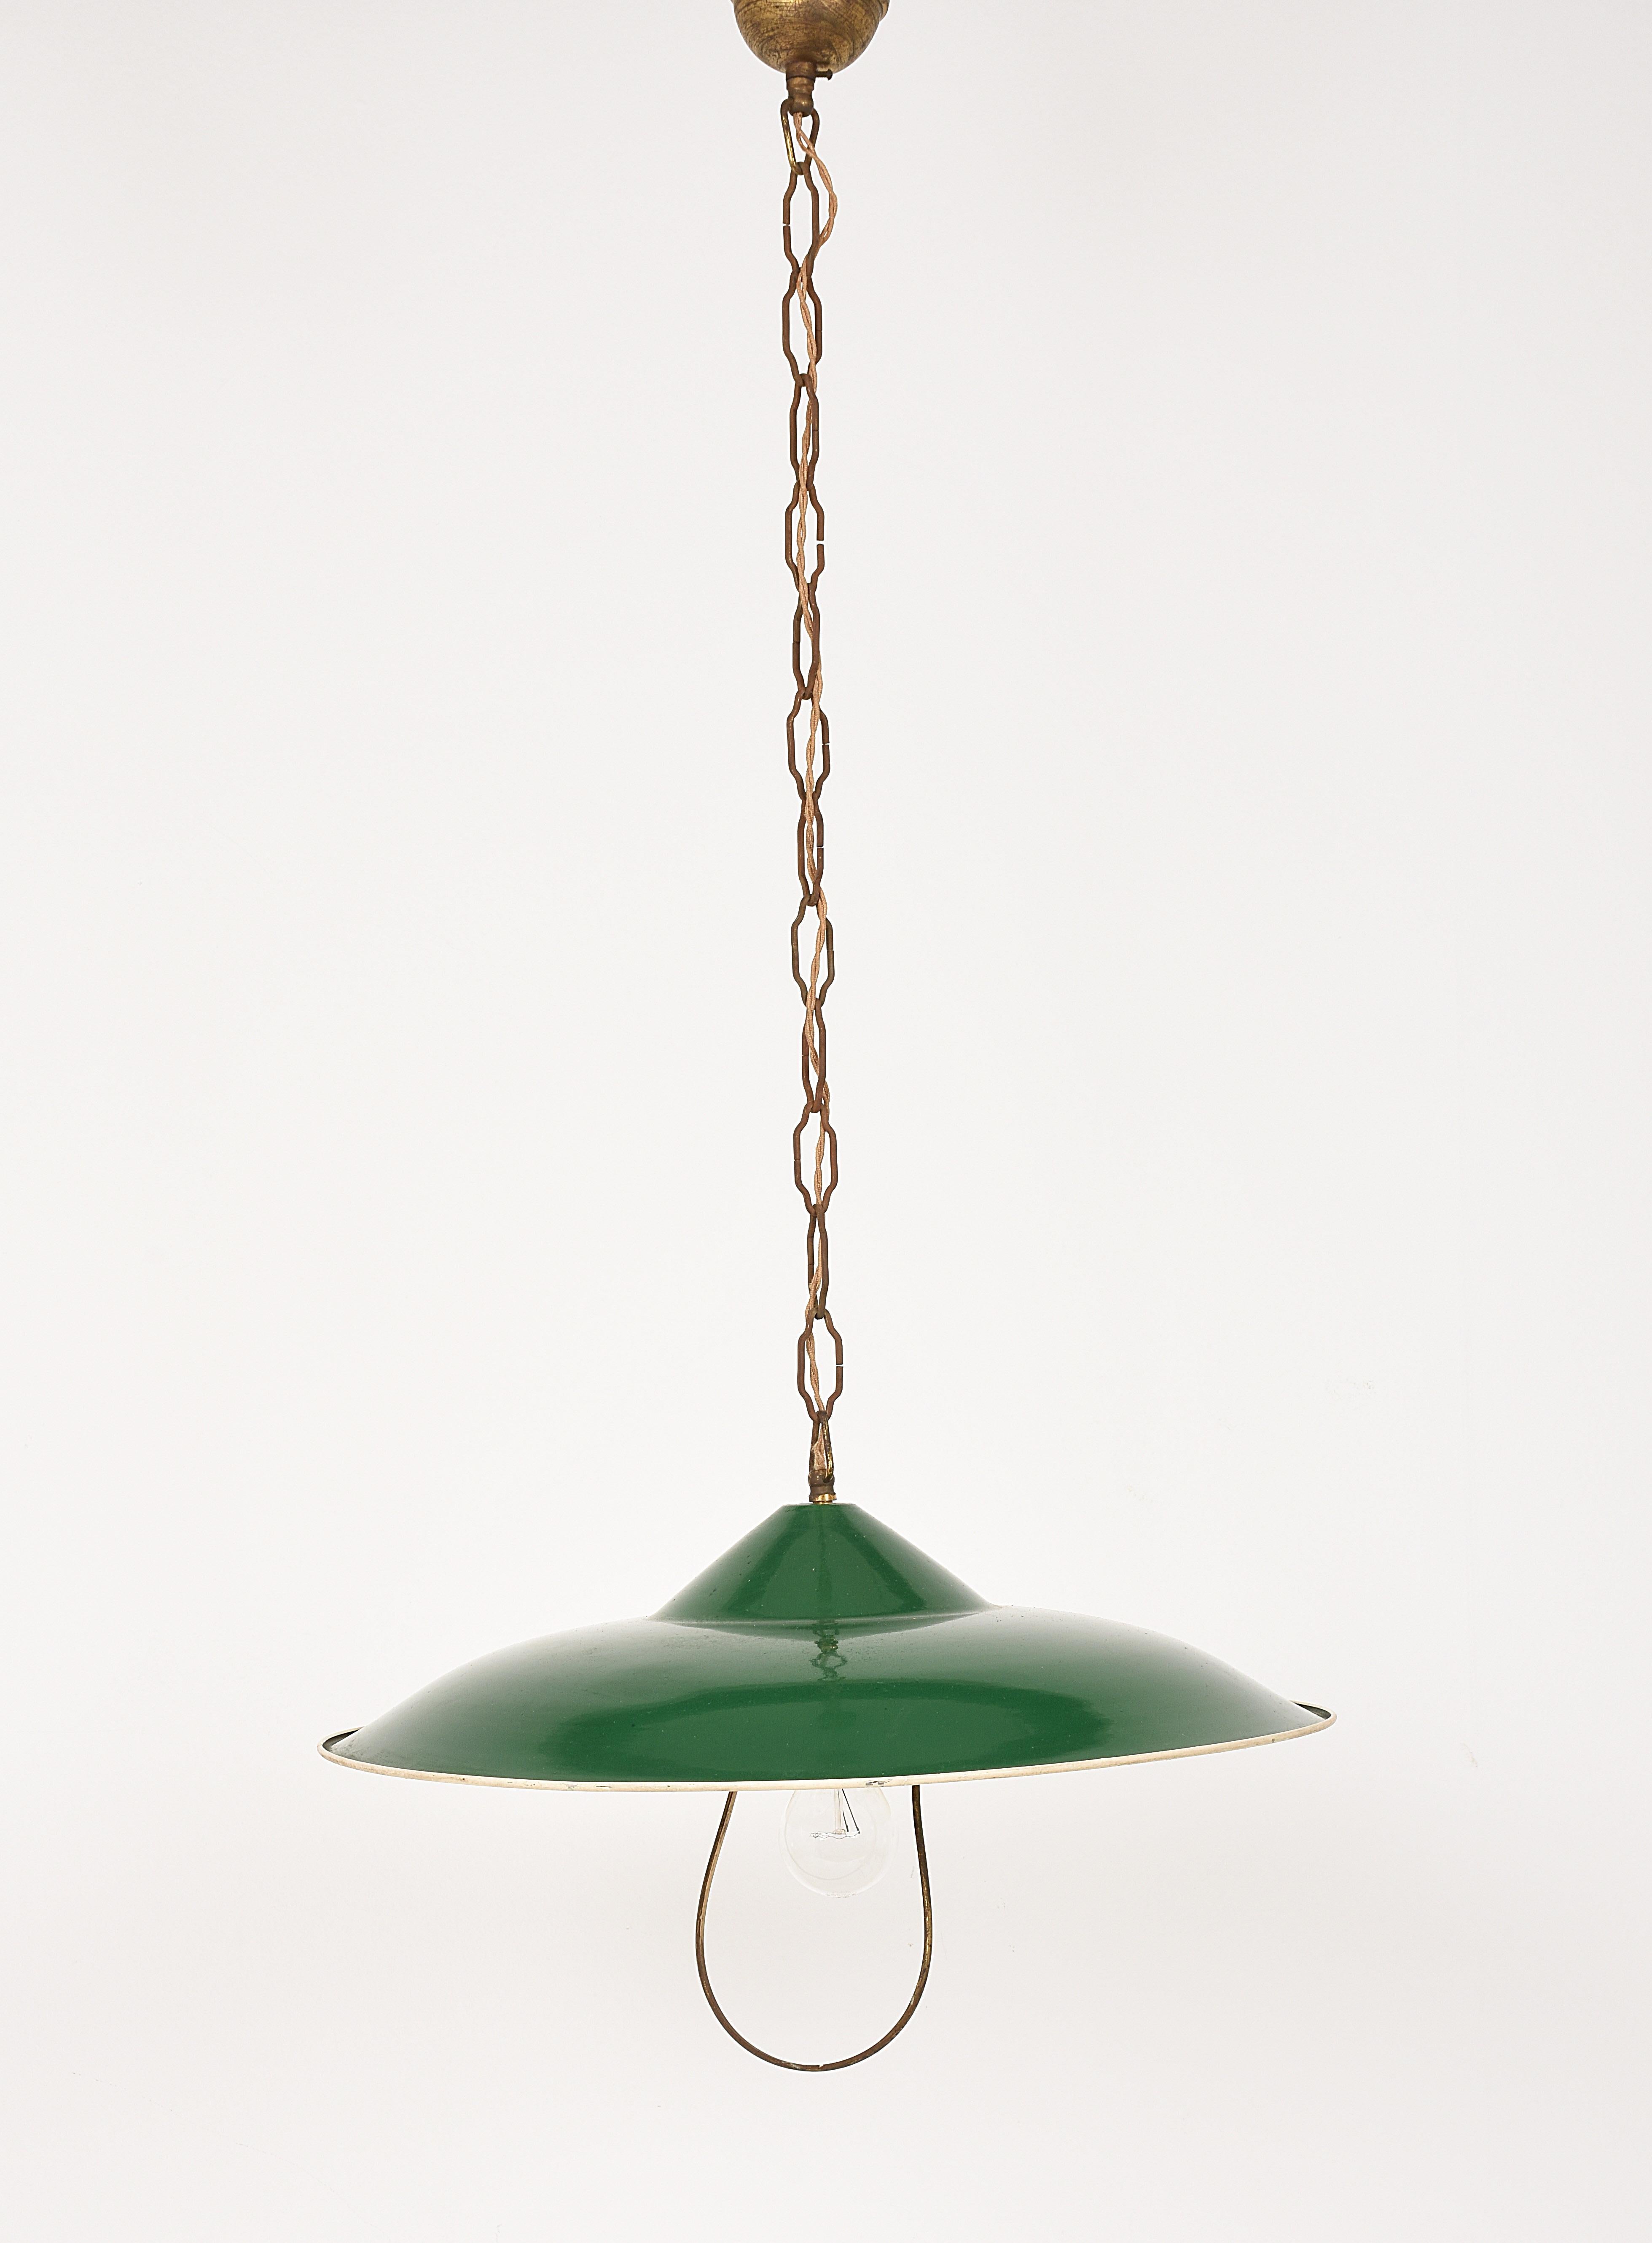 Chandelier in Green Glazed Metal Pendant Italy, Industrial Style of the 1950s In Fair Condition For Sale In Roma, IT